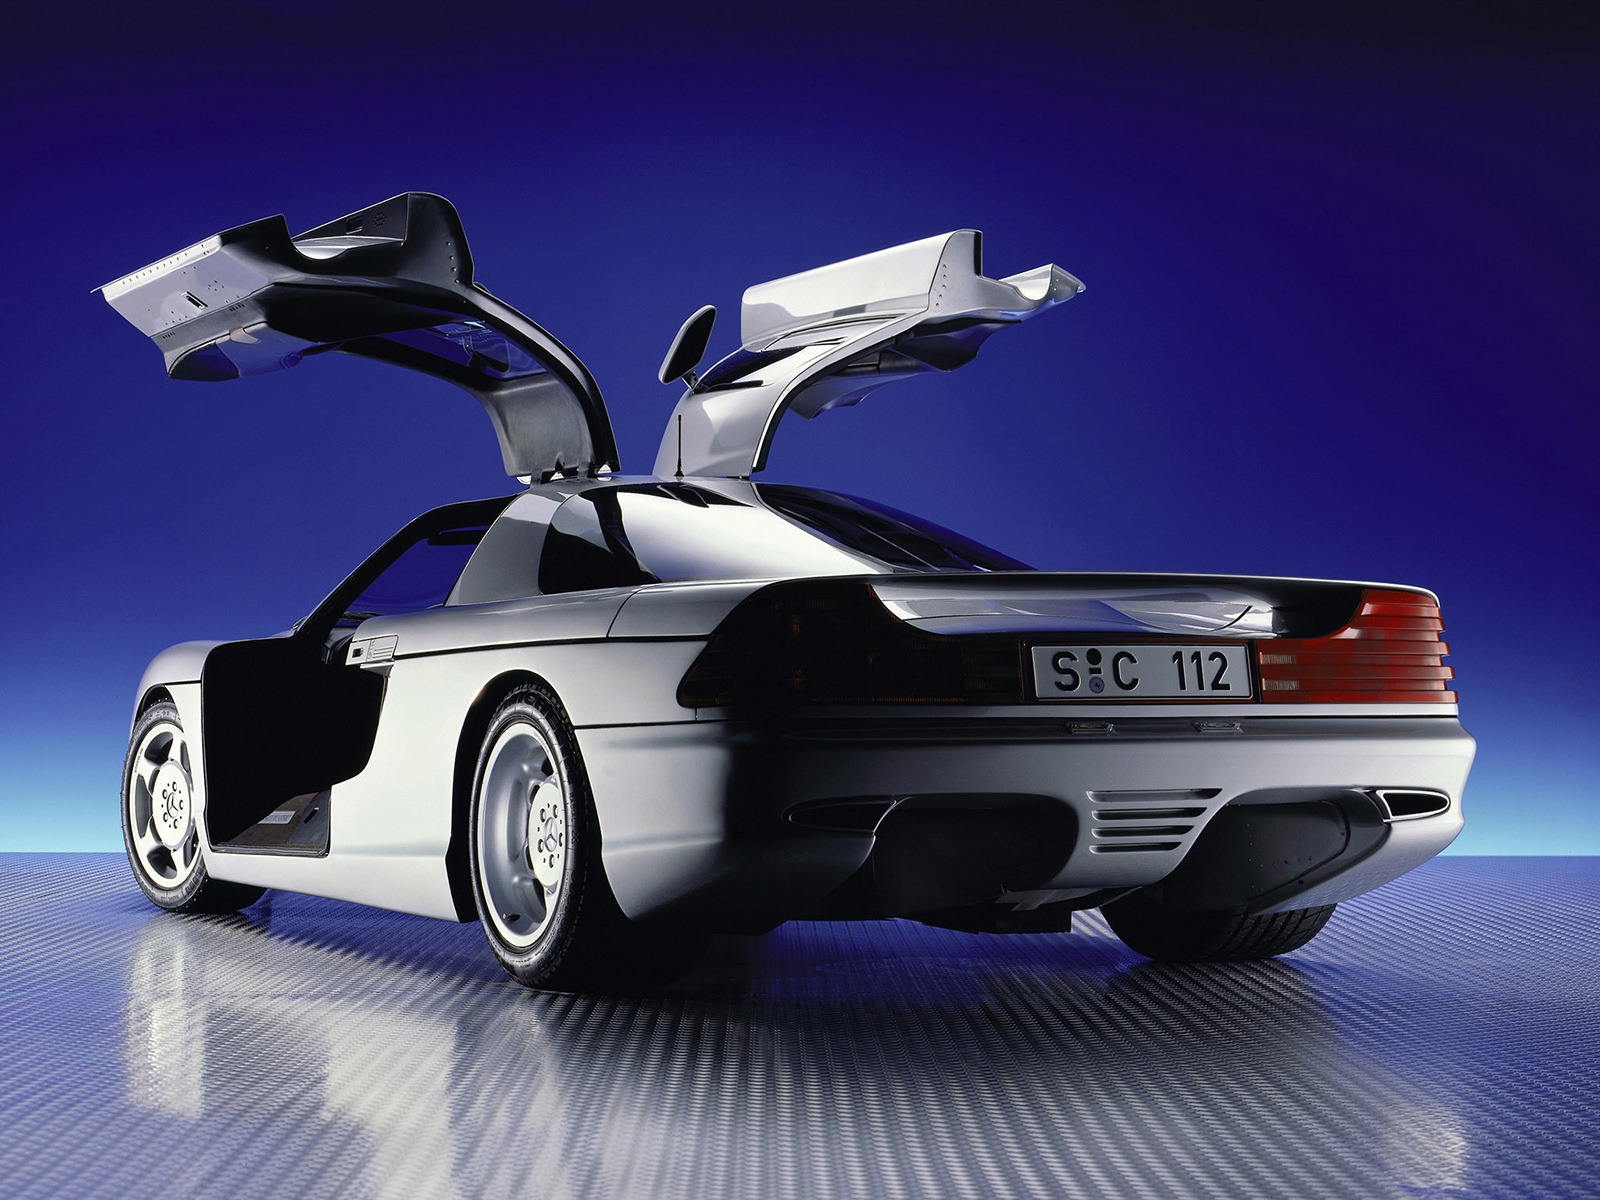 Mercedes C112 Concept 1991 for 1600 x 1200 resolution